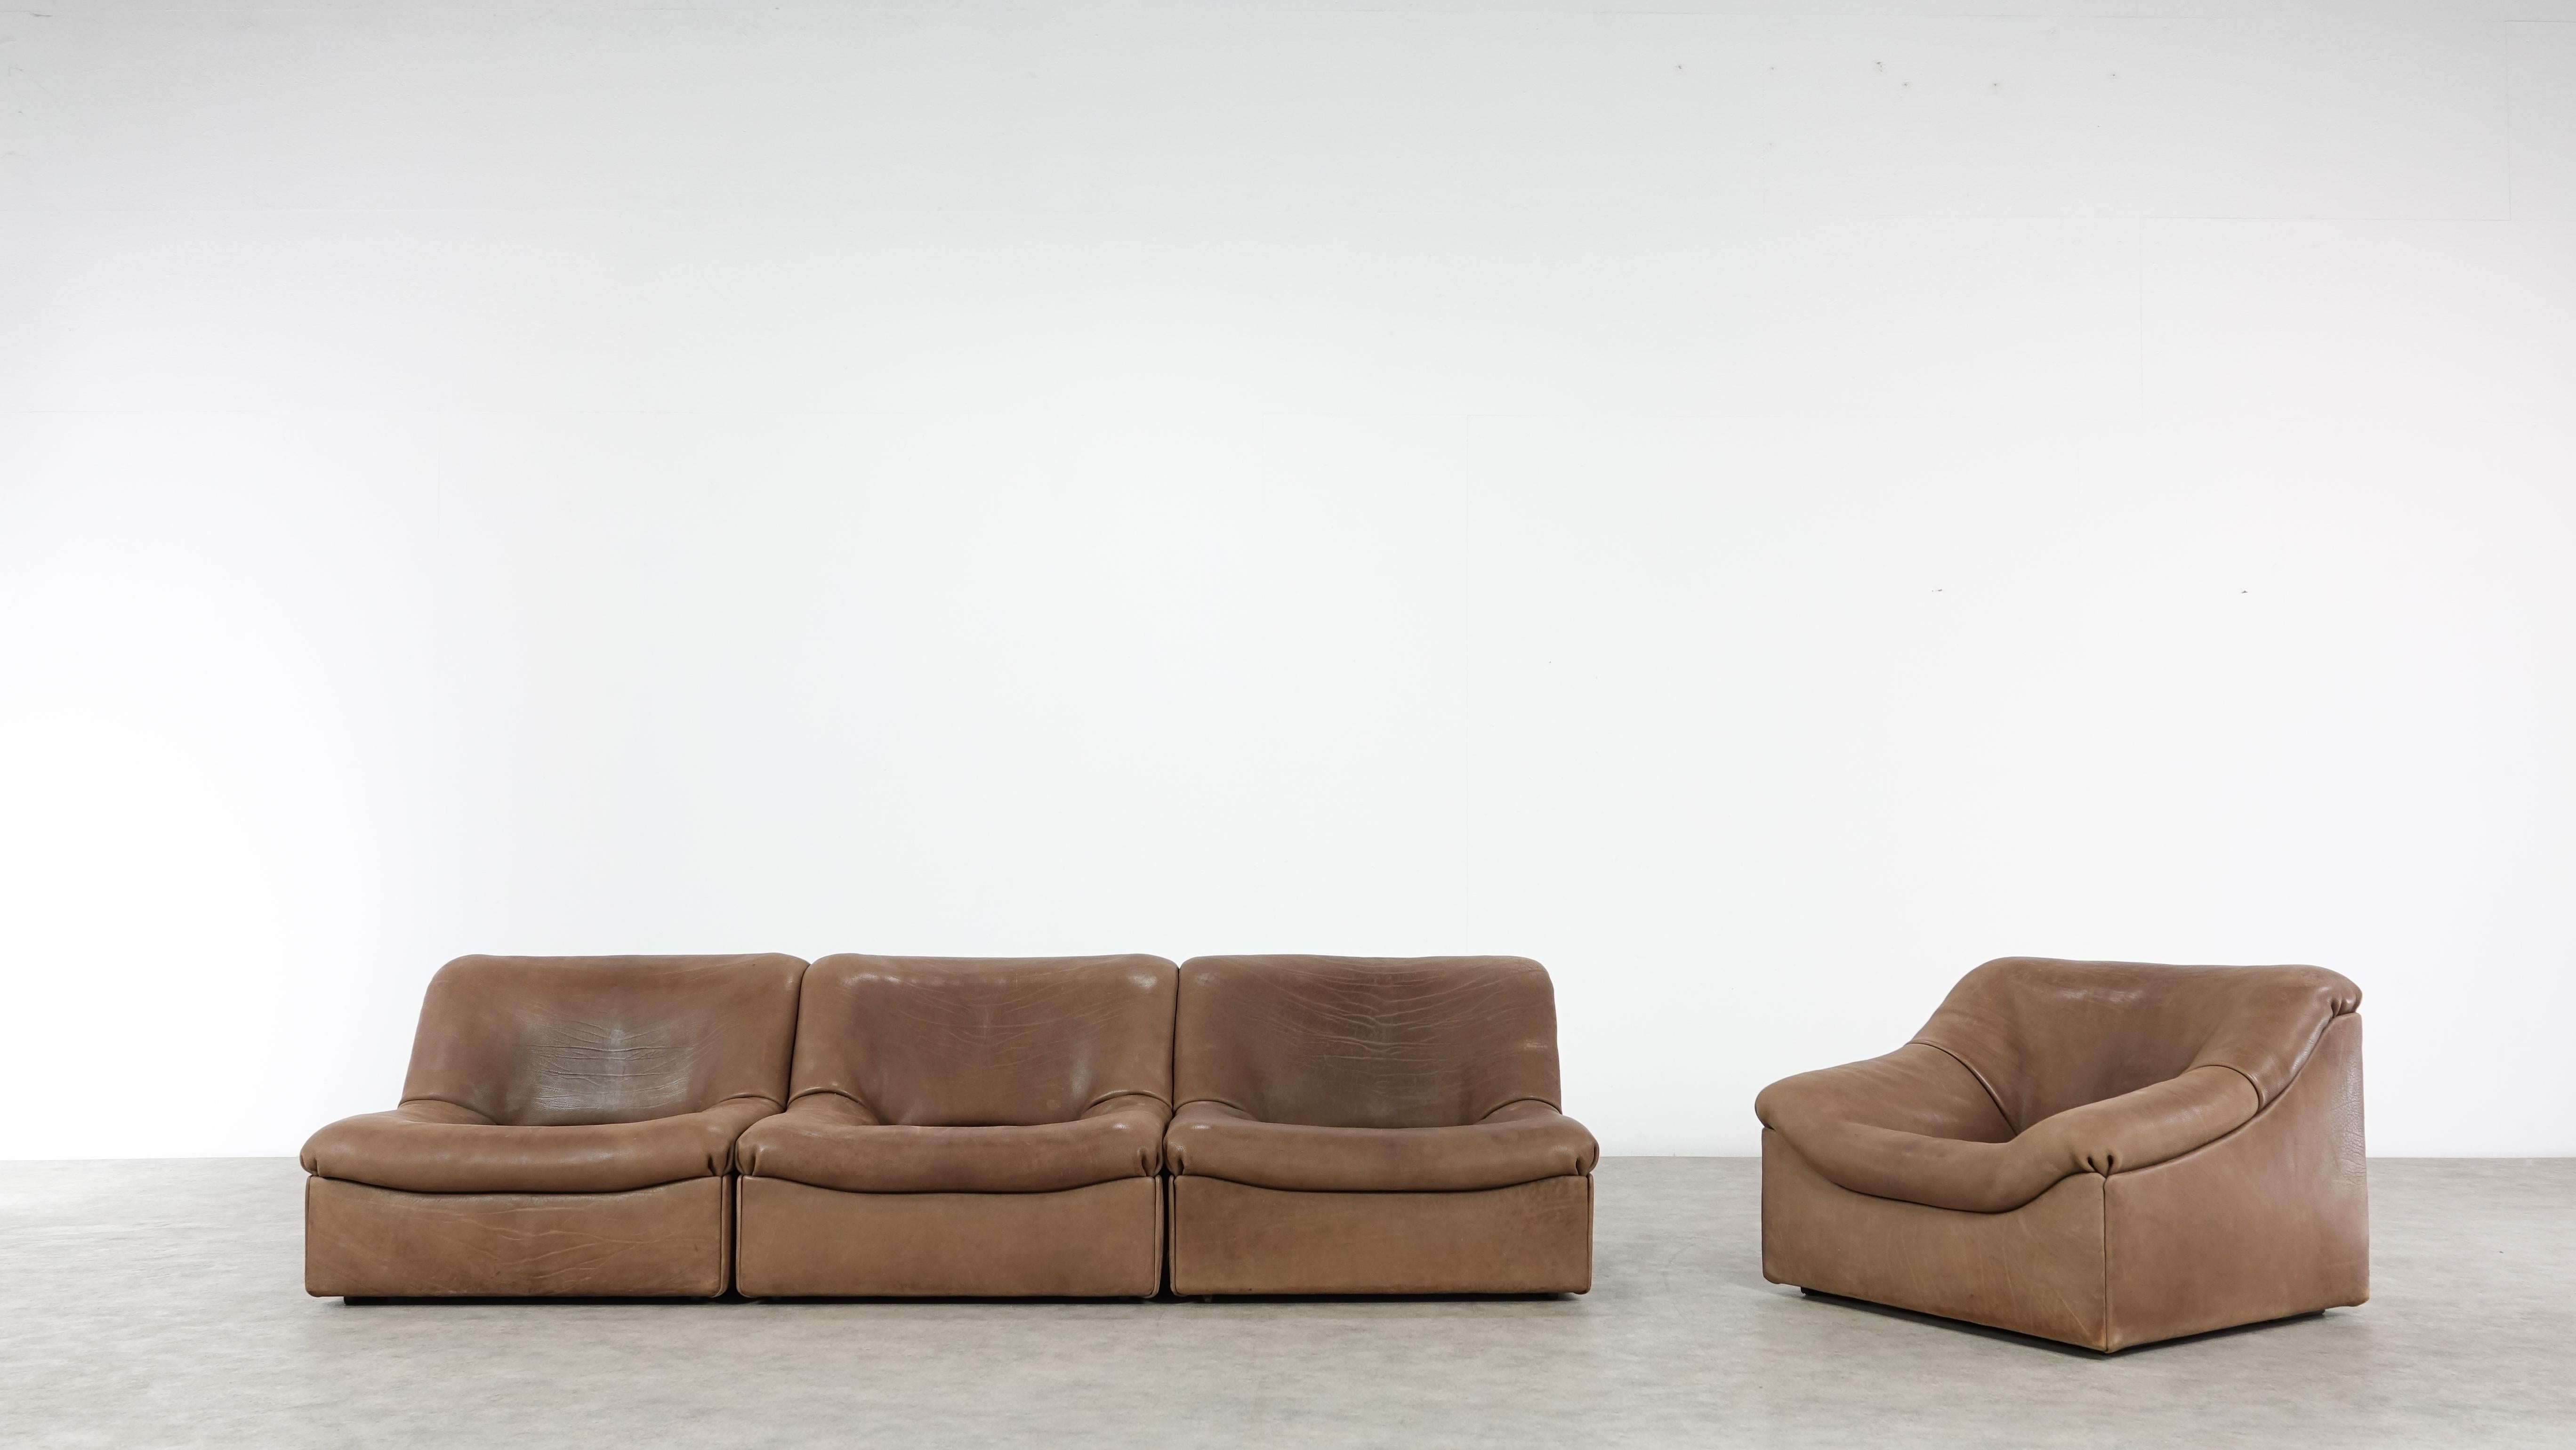 Cognac colored original De Sede DS designer leather corner sofa and one easychair in a minimalistic and modern design, with a convenient modular function, made for pure comfort and flexibility.